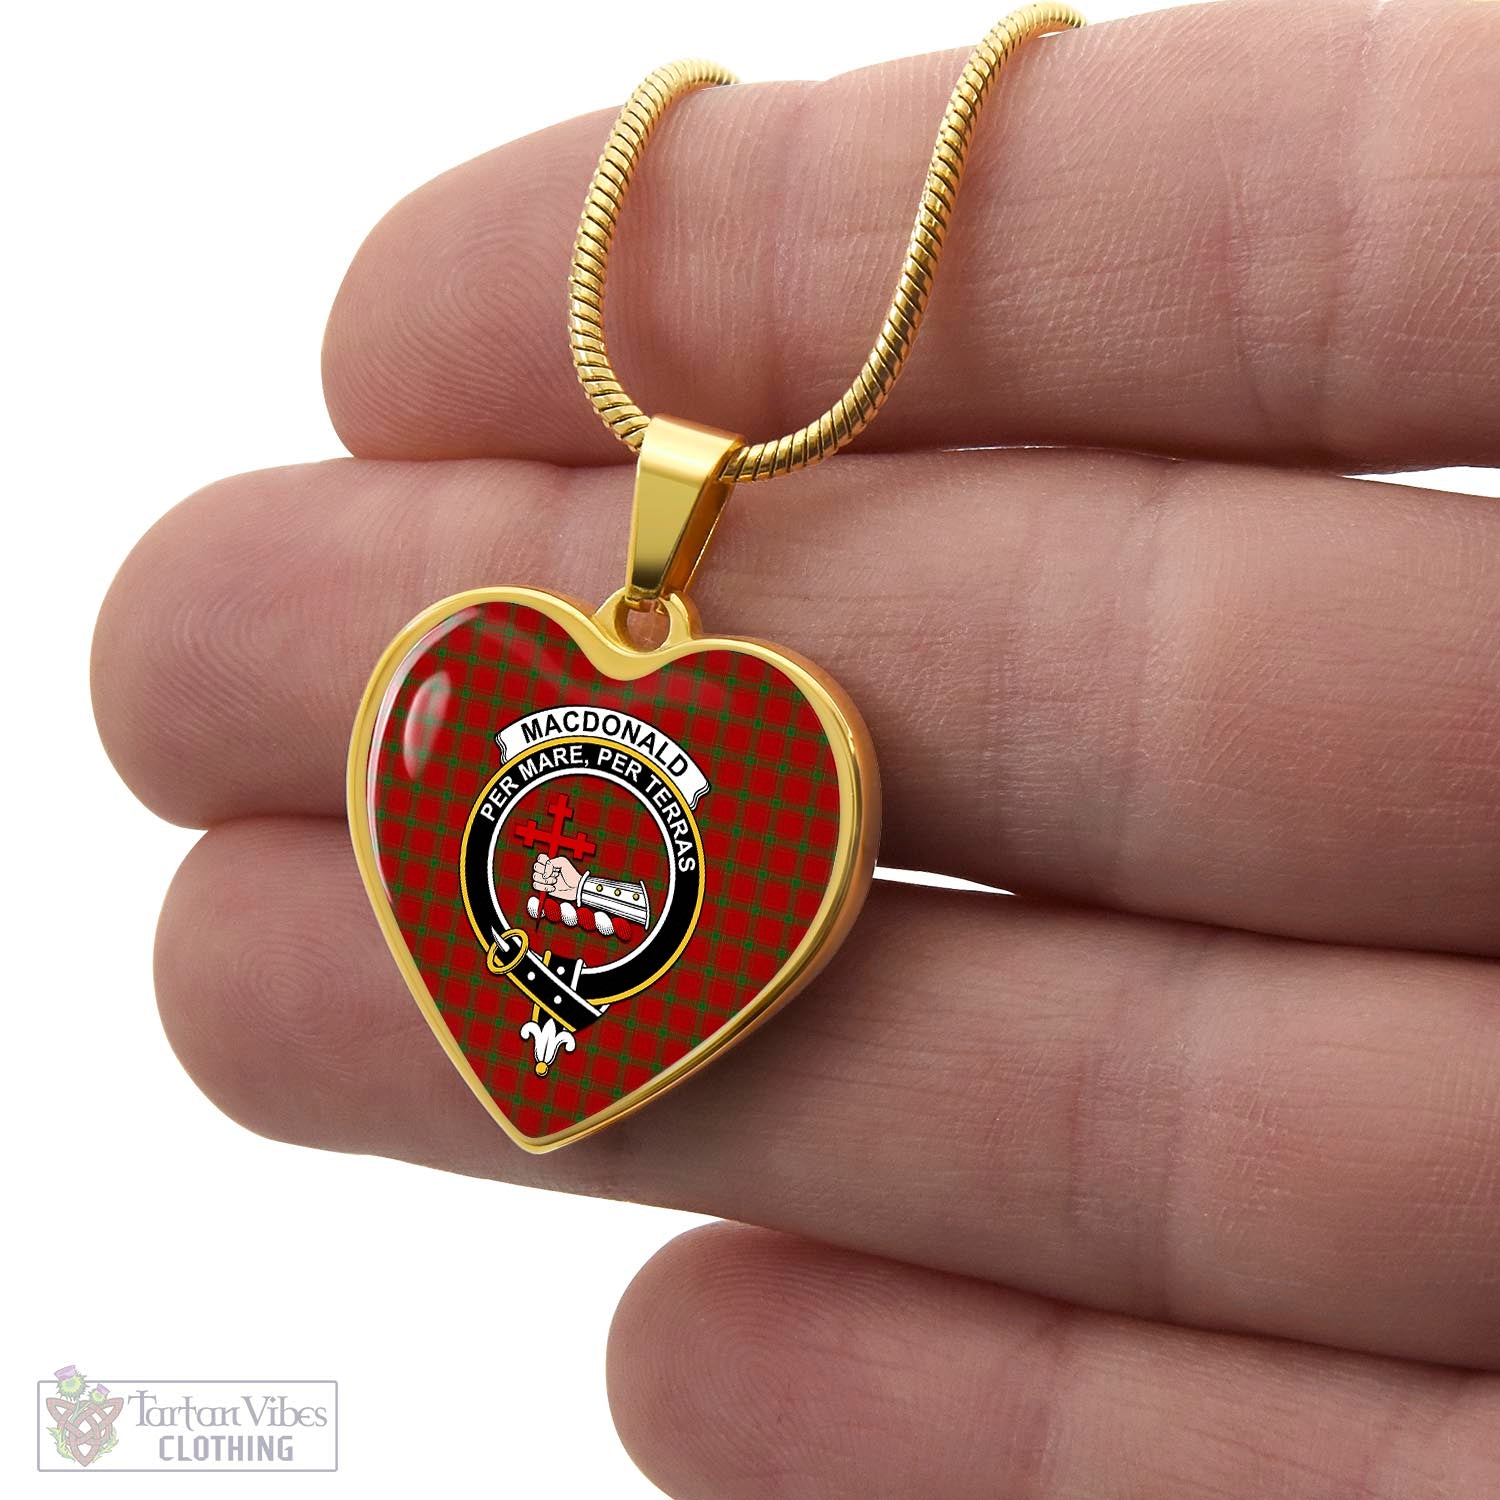 Tartan Vibes Clothing MacDonald of Sleat Tartan Heart Necklace with Family Crest